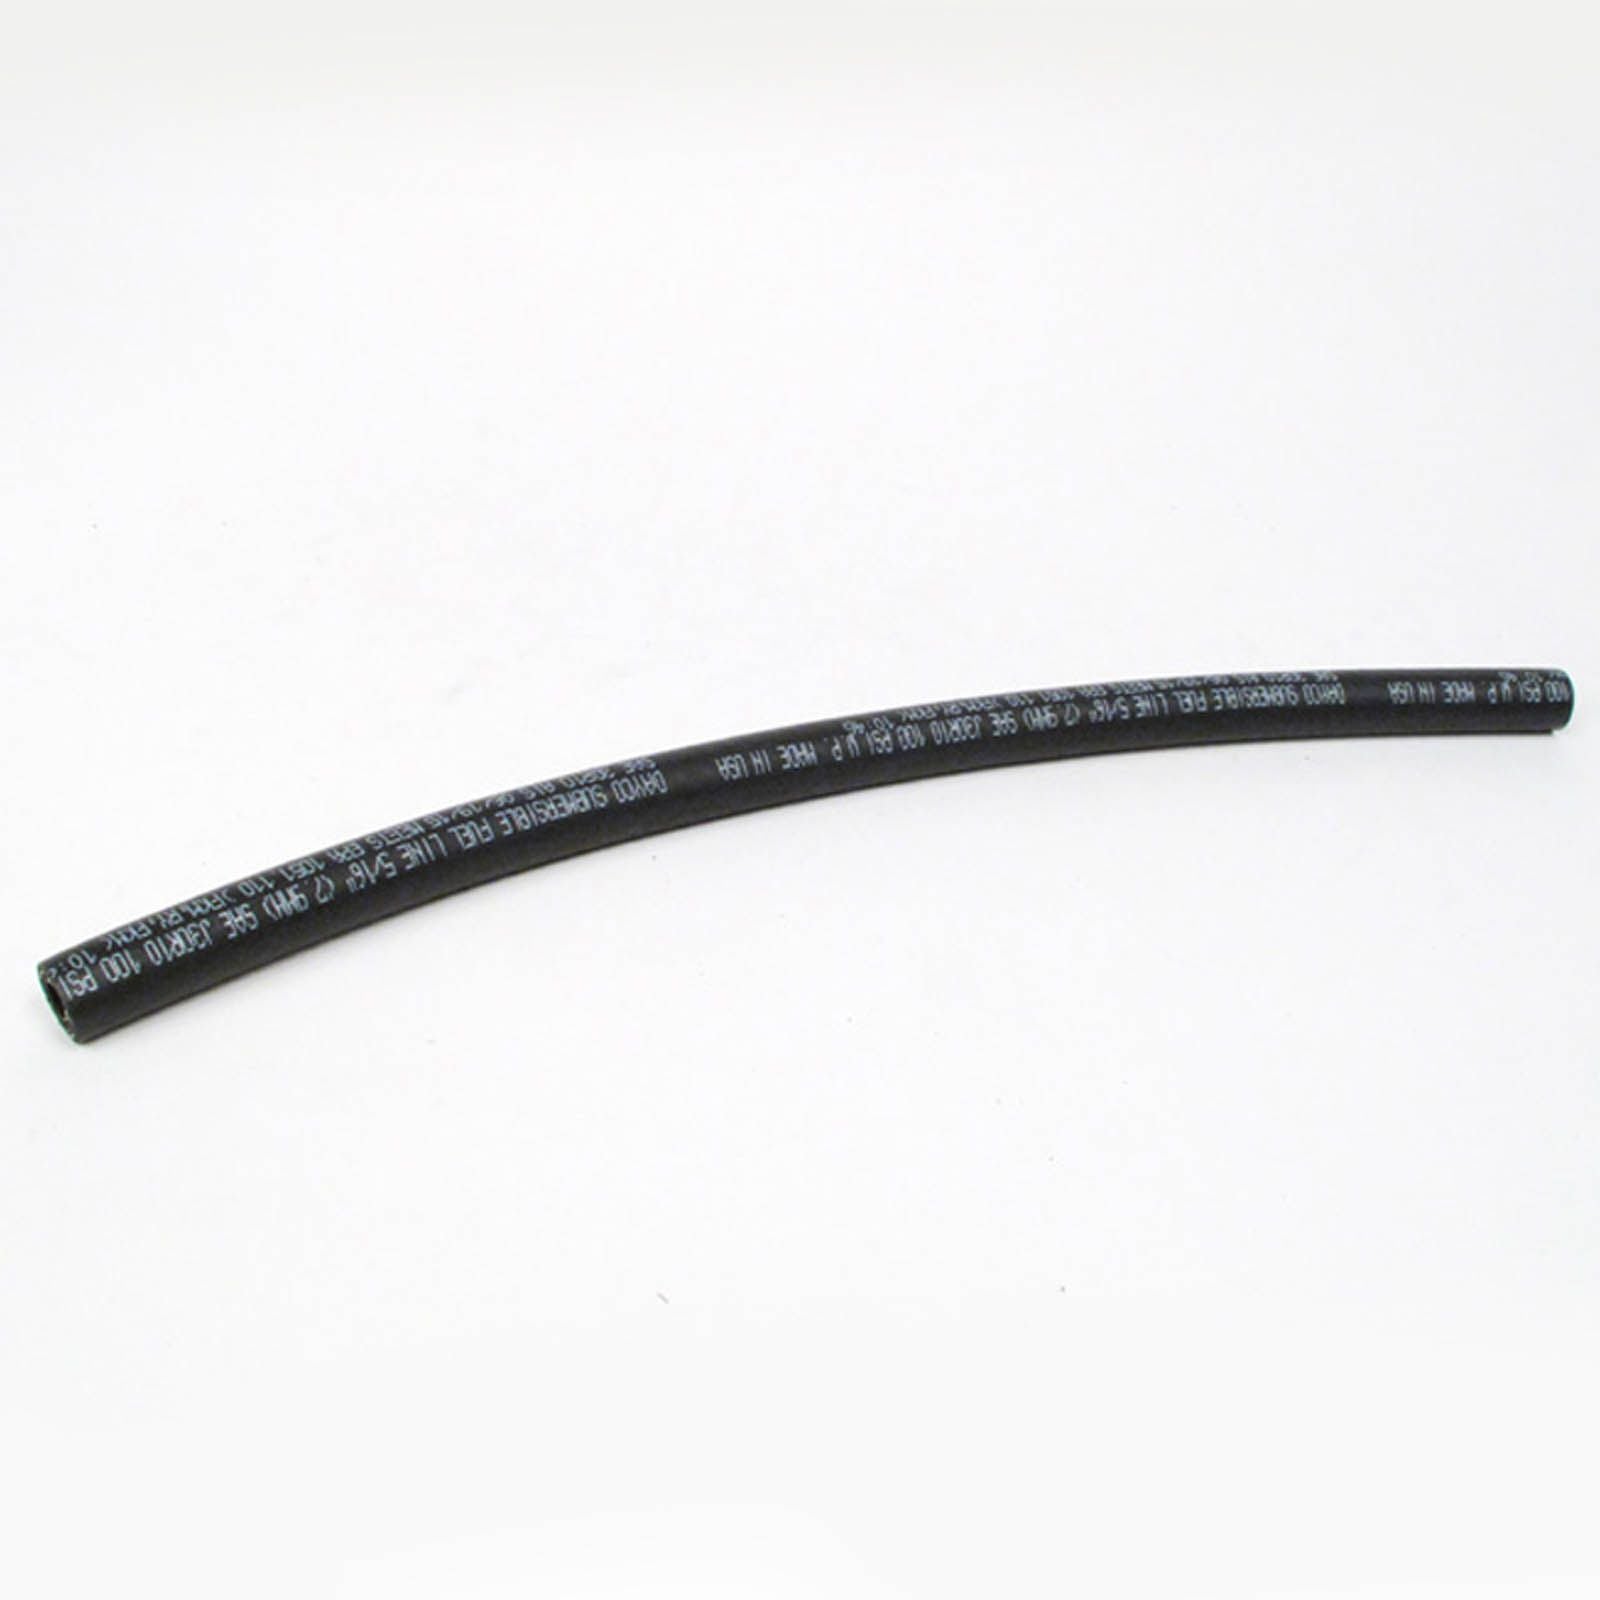 New DAYCO Submersible (Intank) Fuel Hose 6mm #FHDS6